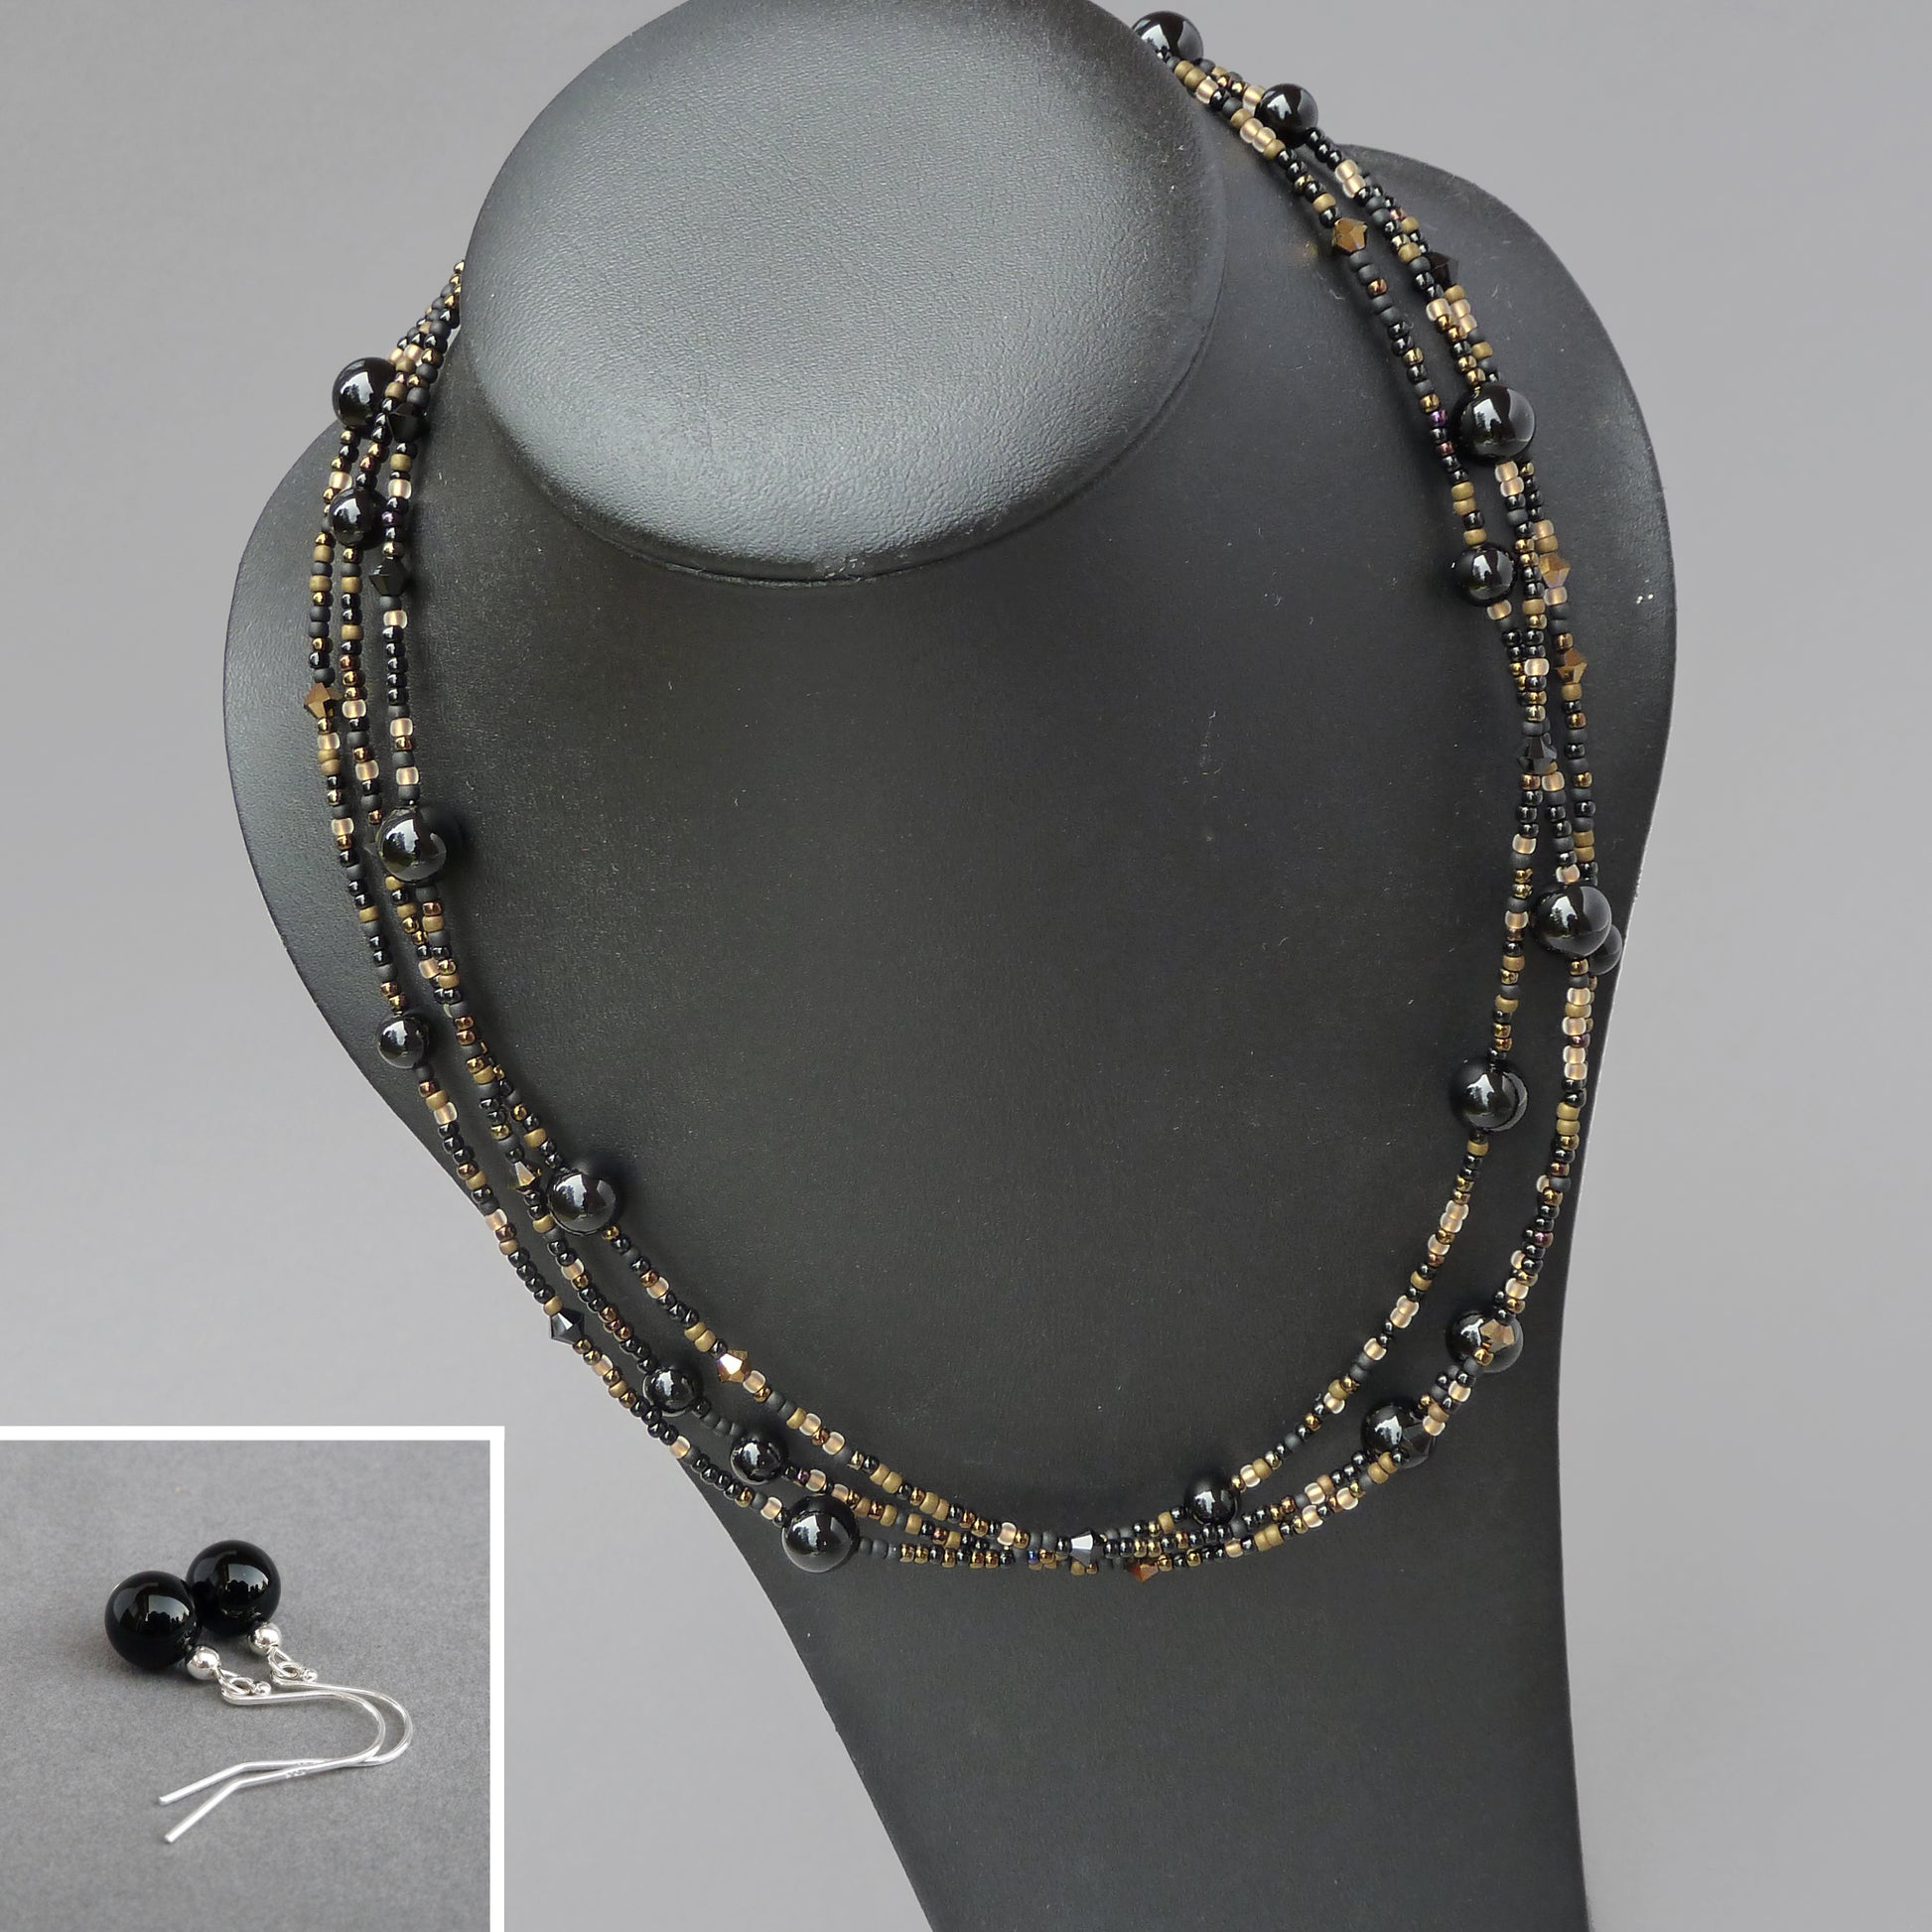 Black necklace and earrings set